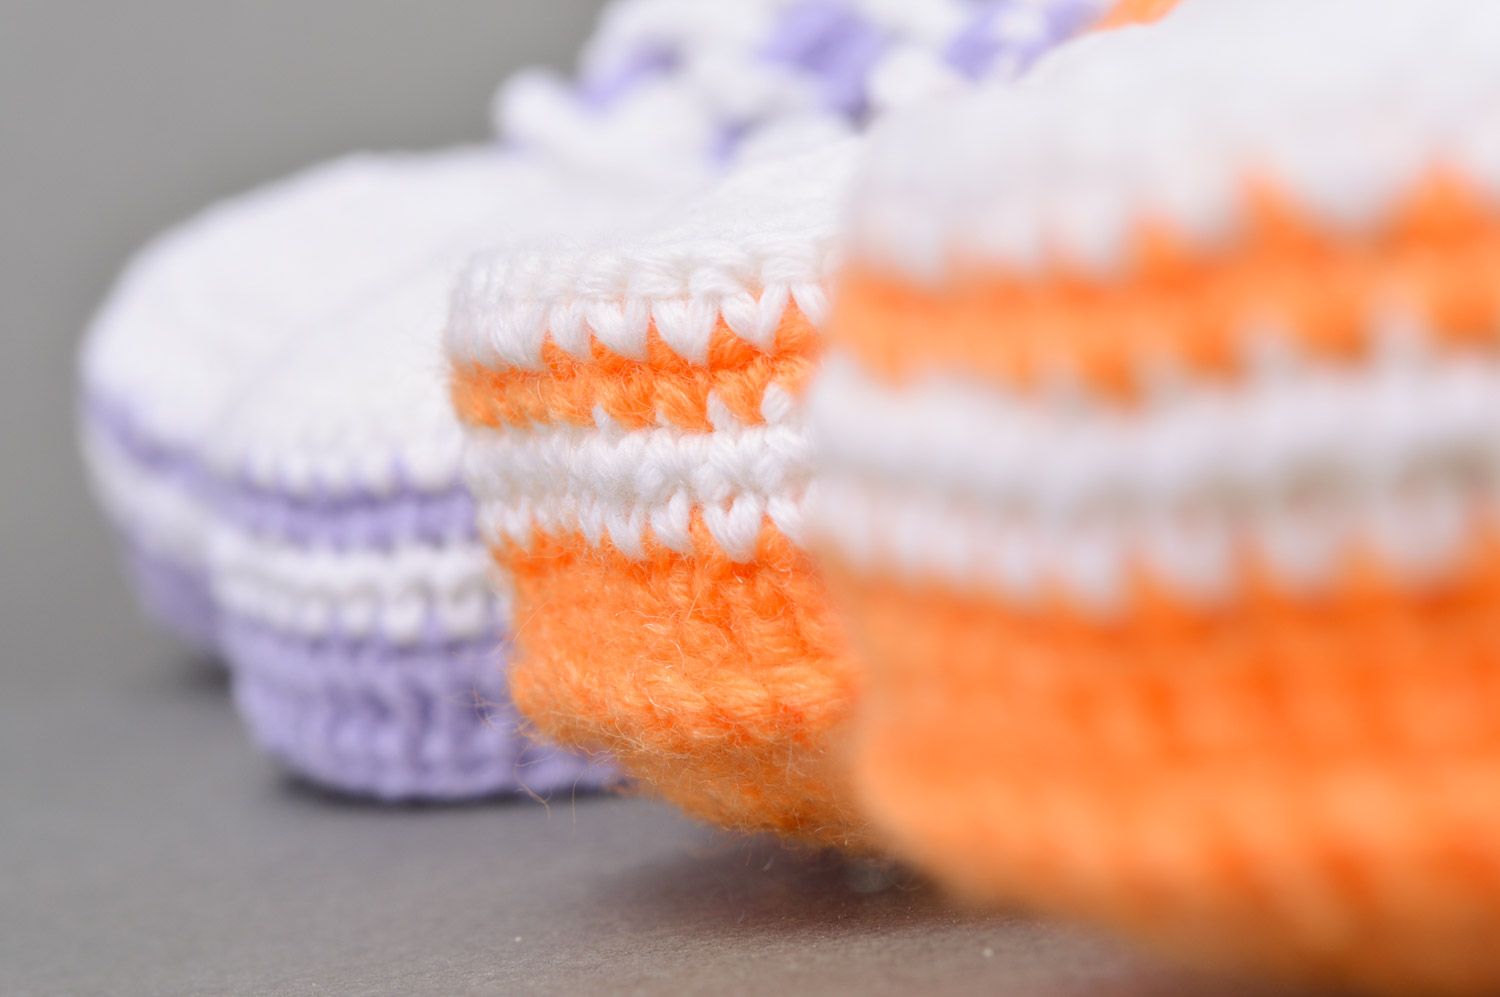 Handmade crocheted baby booties set of 2 pairs in orange and purple colors photo 4